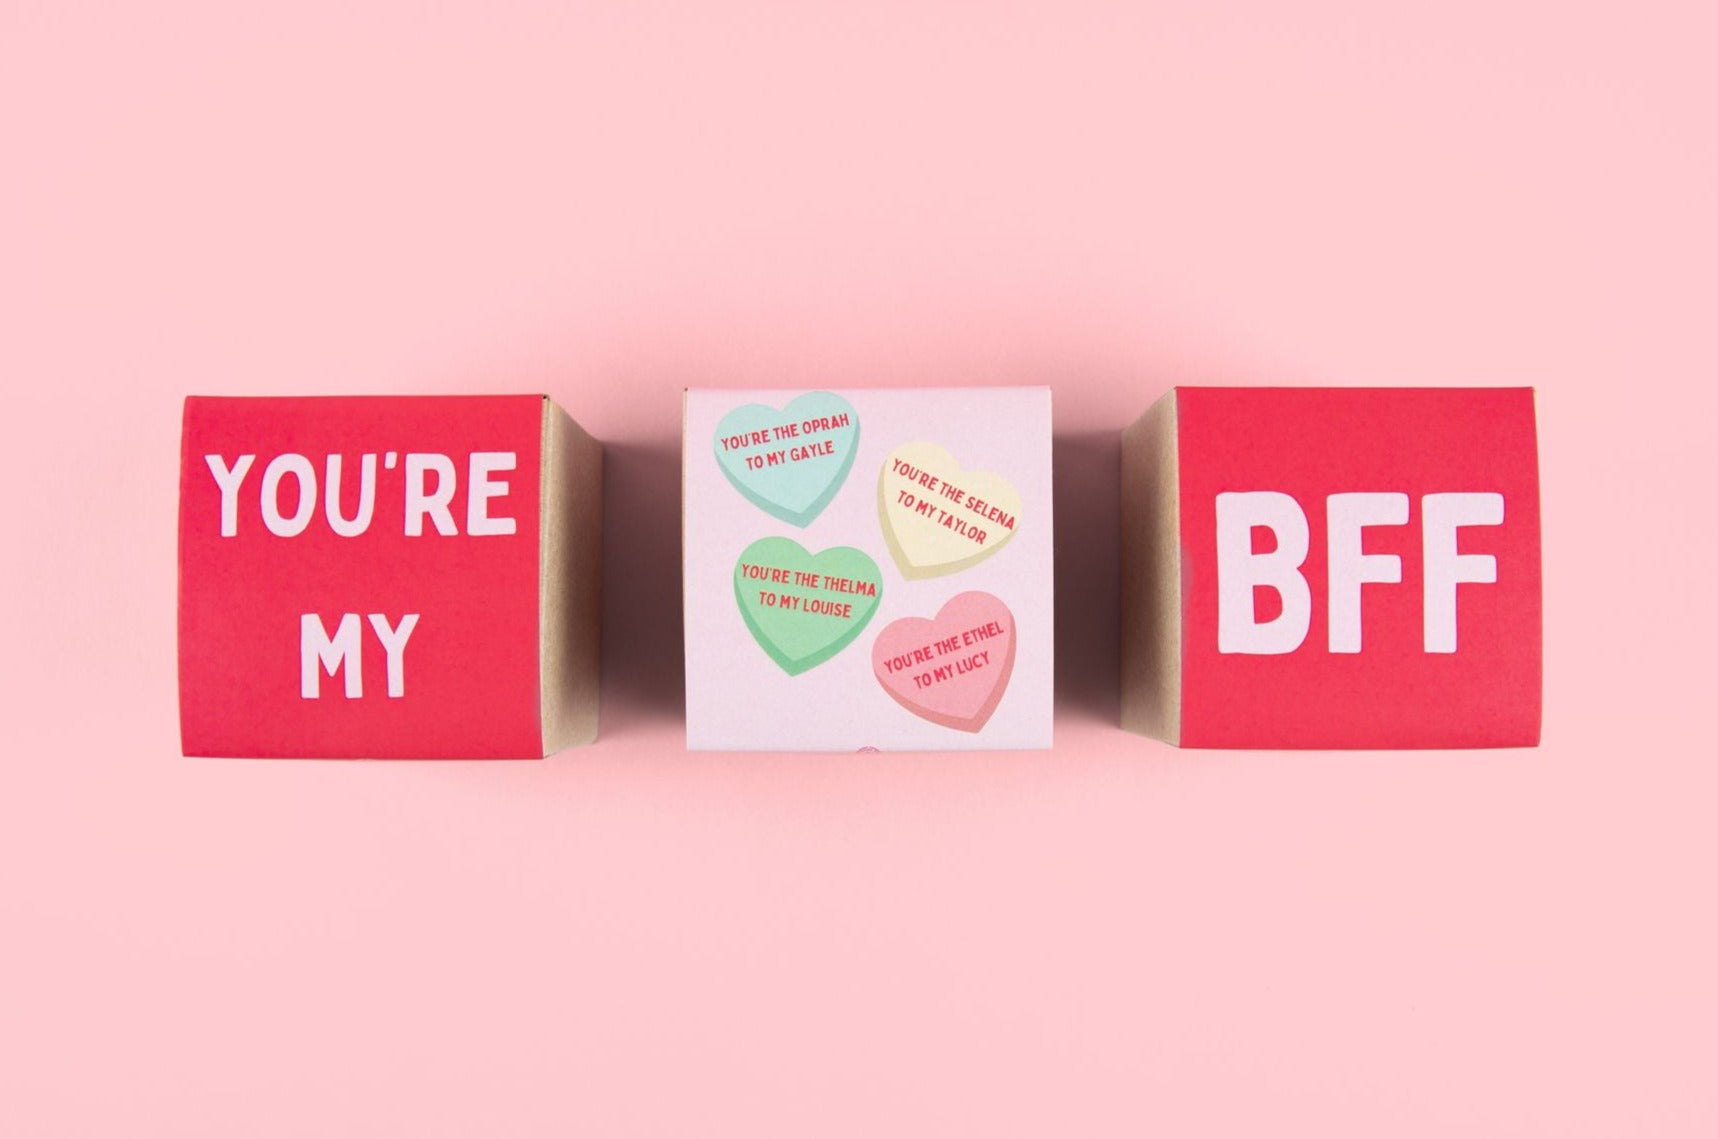 "You're My BFF" Trio ❤ GALENTINE'S SPECIAL